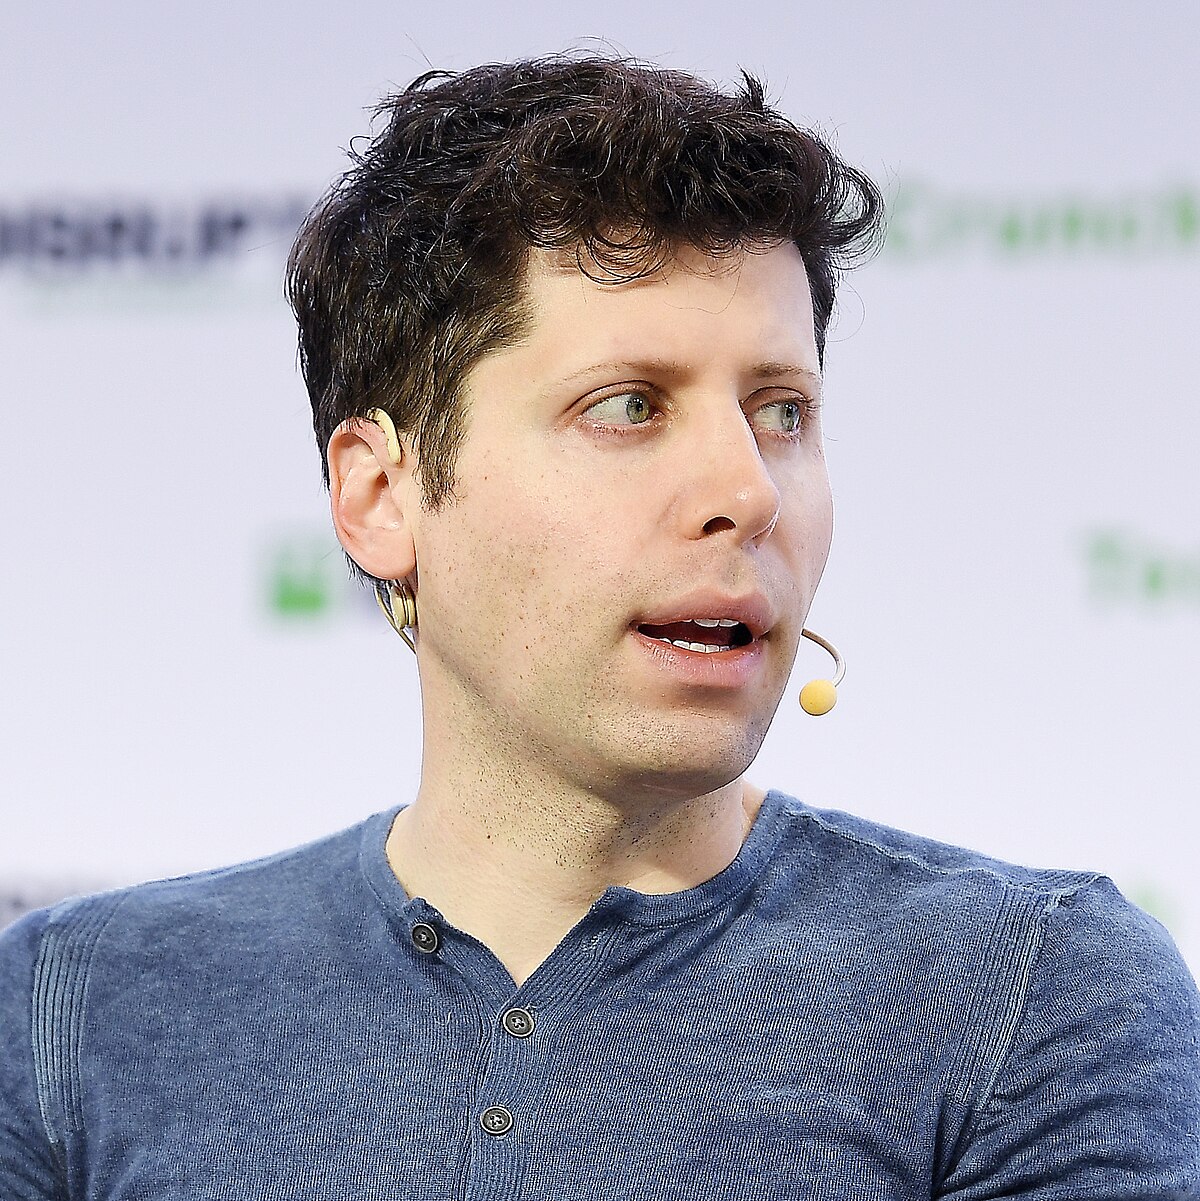 OpenAI CEO, Sam Altman, while sharing his concerns about the potential dangers of AI like ChatGPT, warned that AI would take over most jobs.